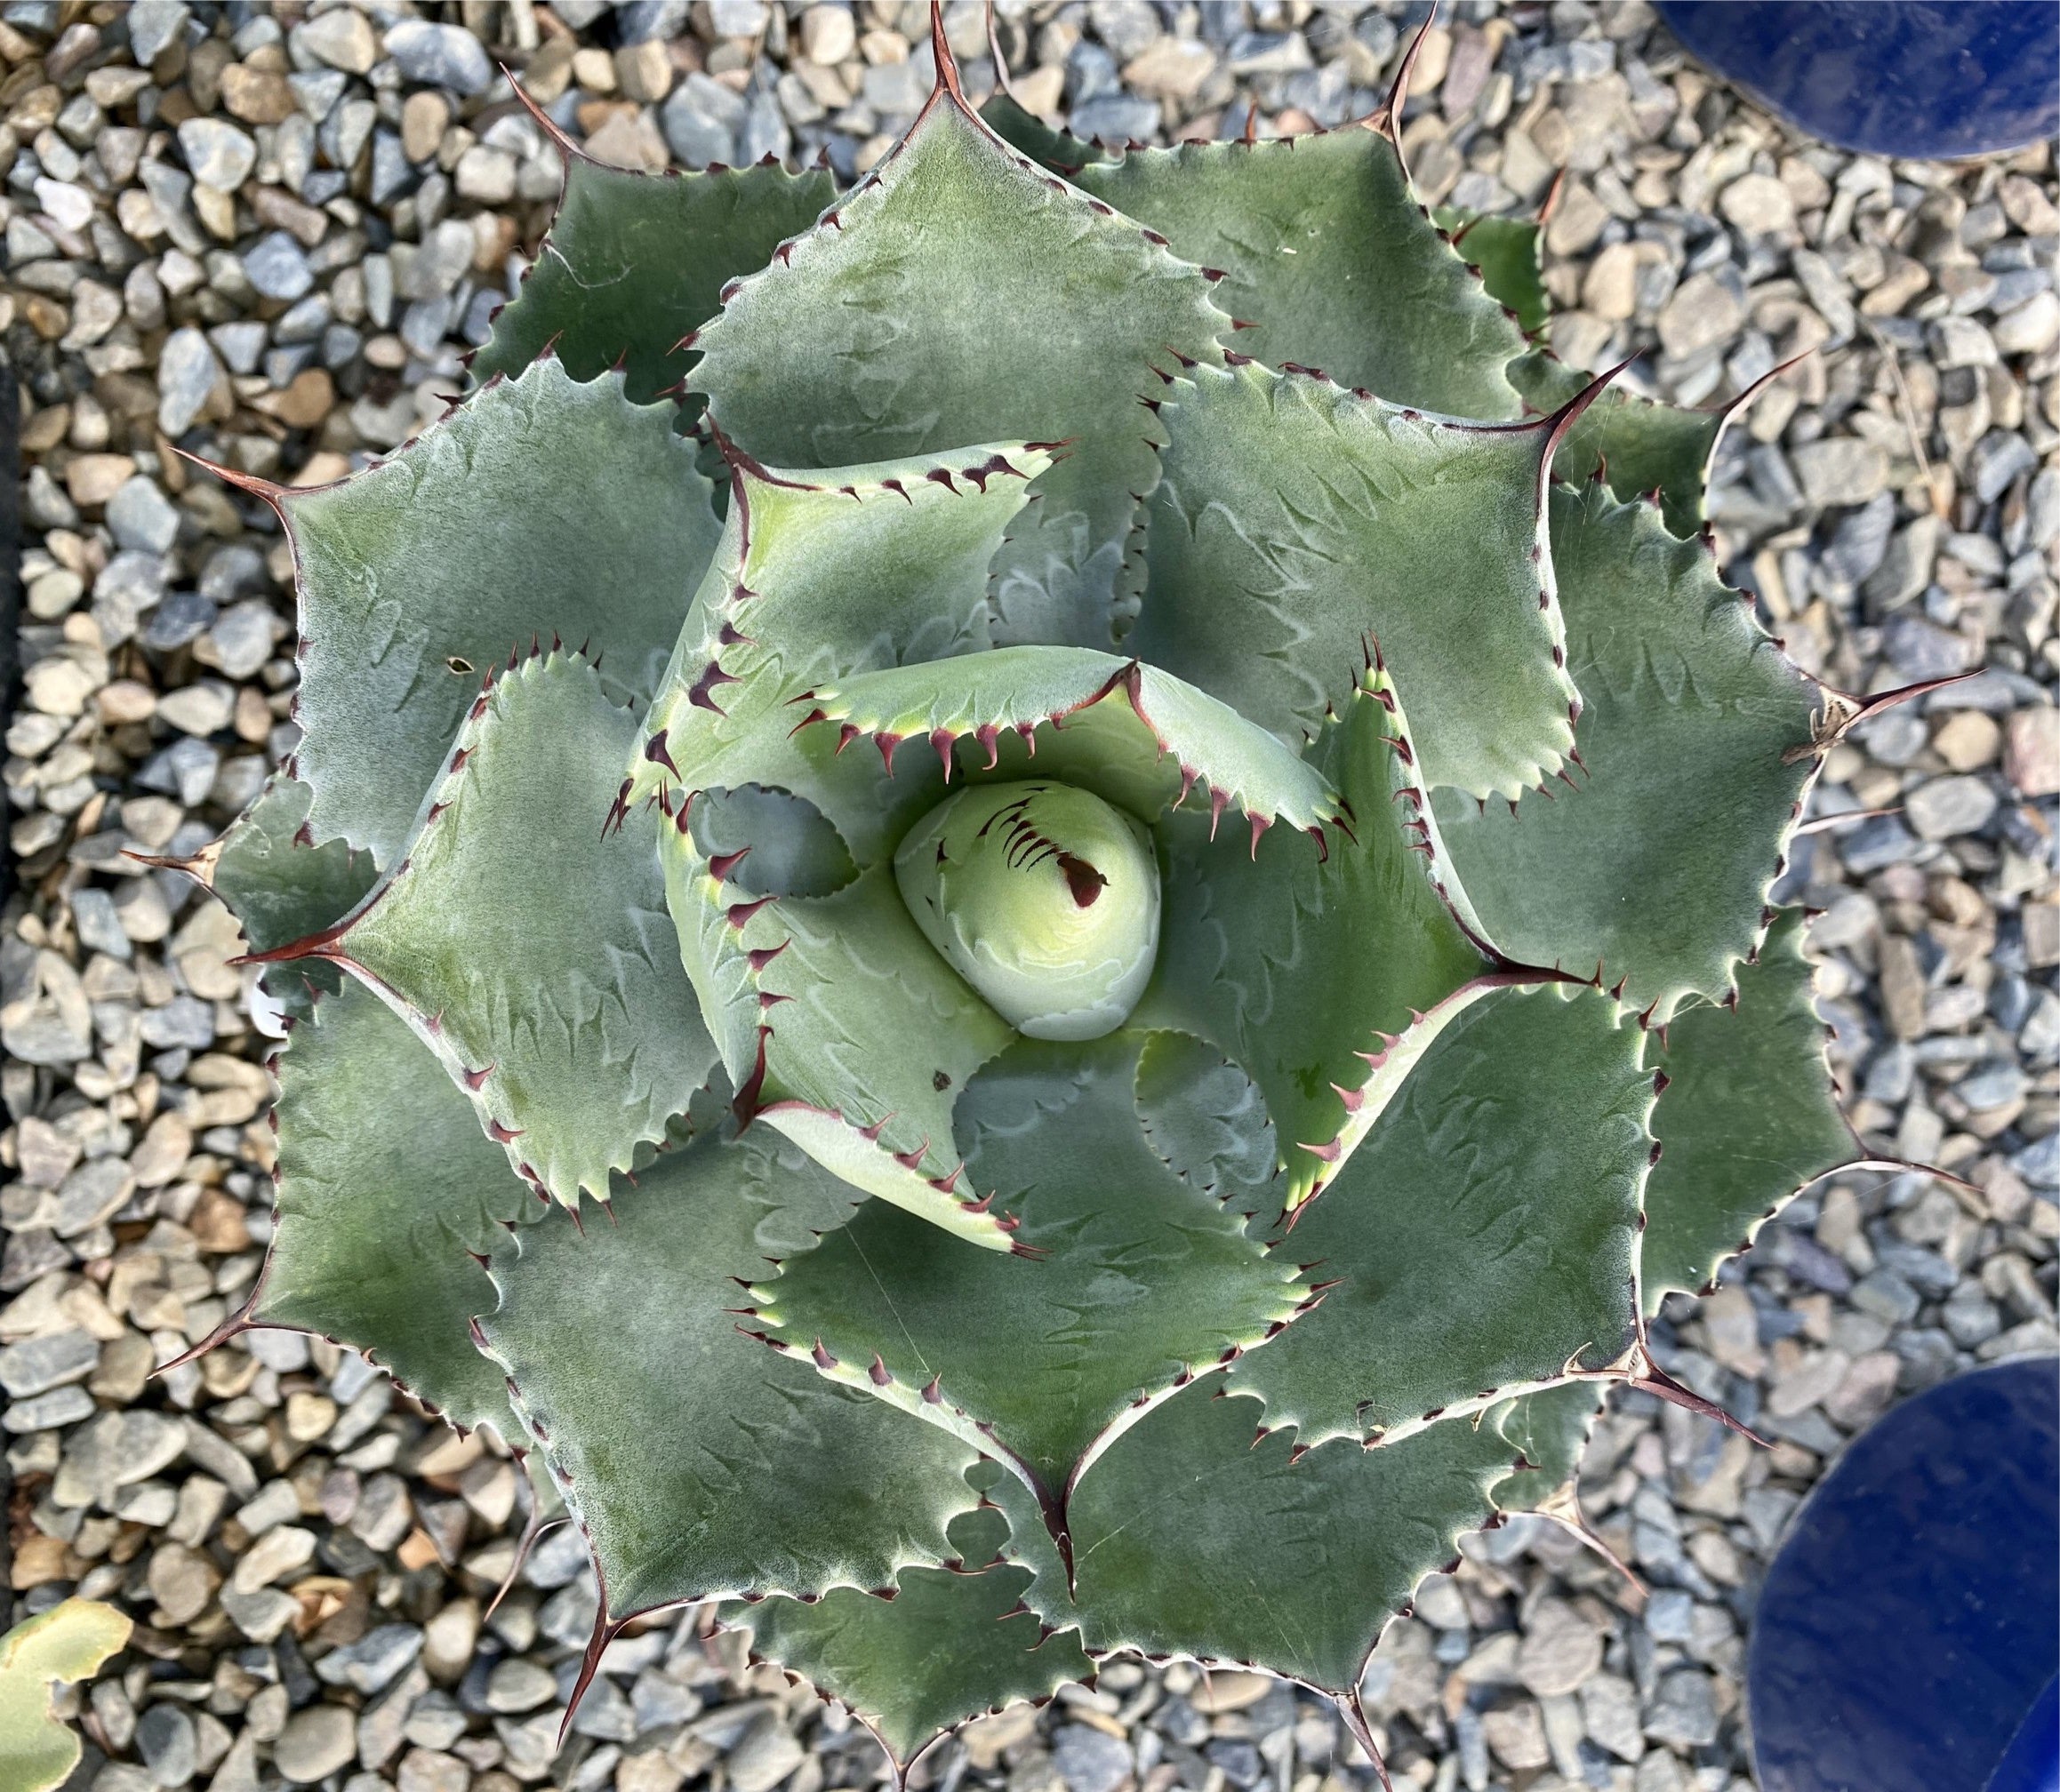 Agave parryi - Parry's Agave